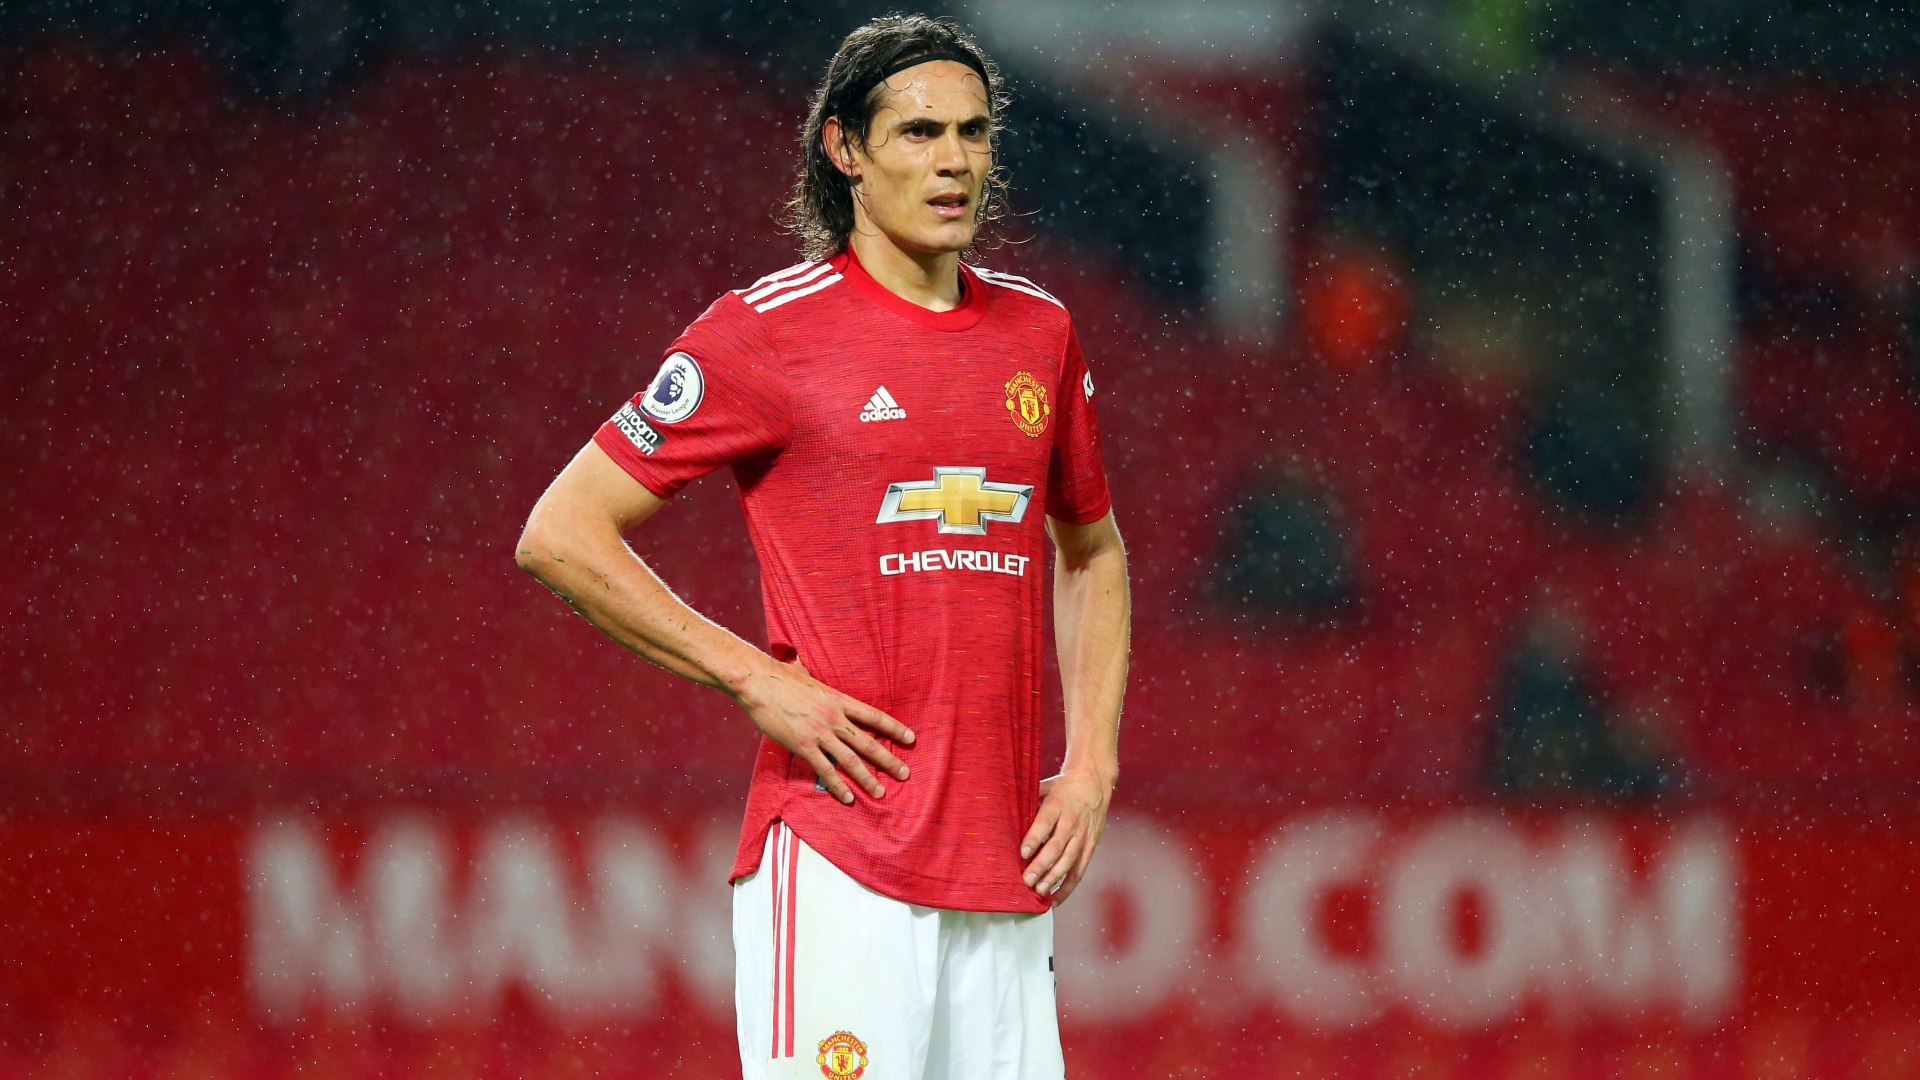 Man Utd S Cavani Banned For Three Games After Racially Insensitive Instagram Post Goal Com